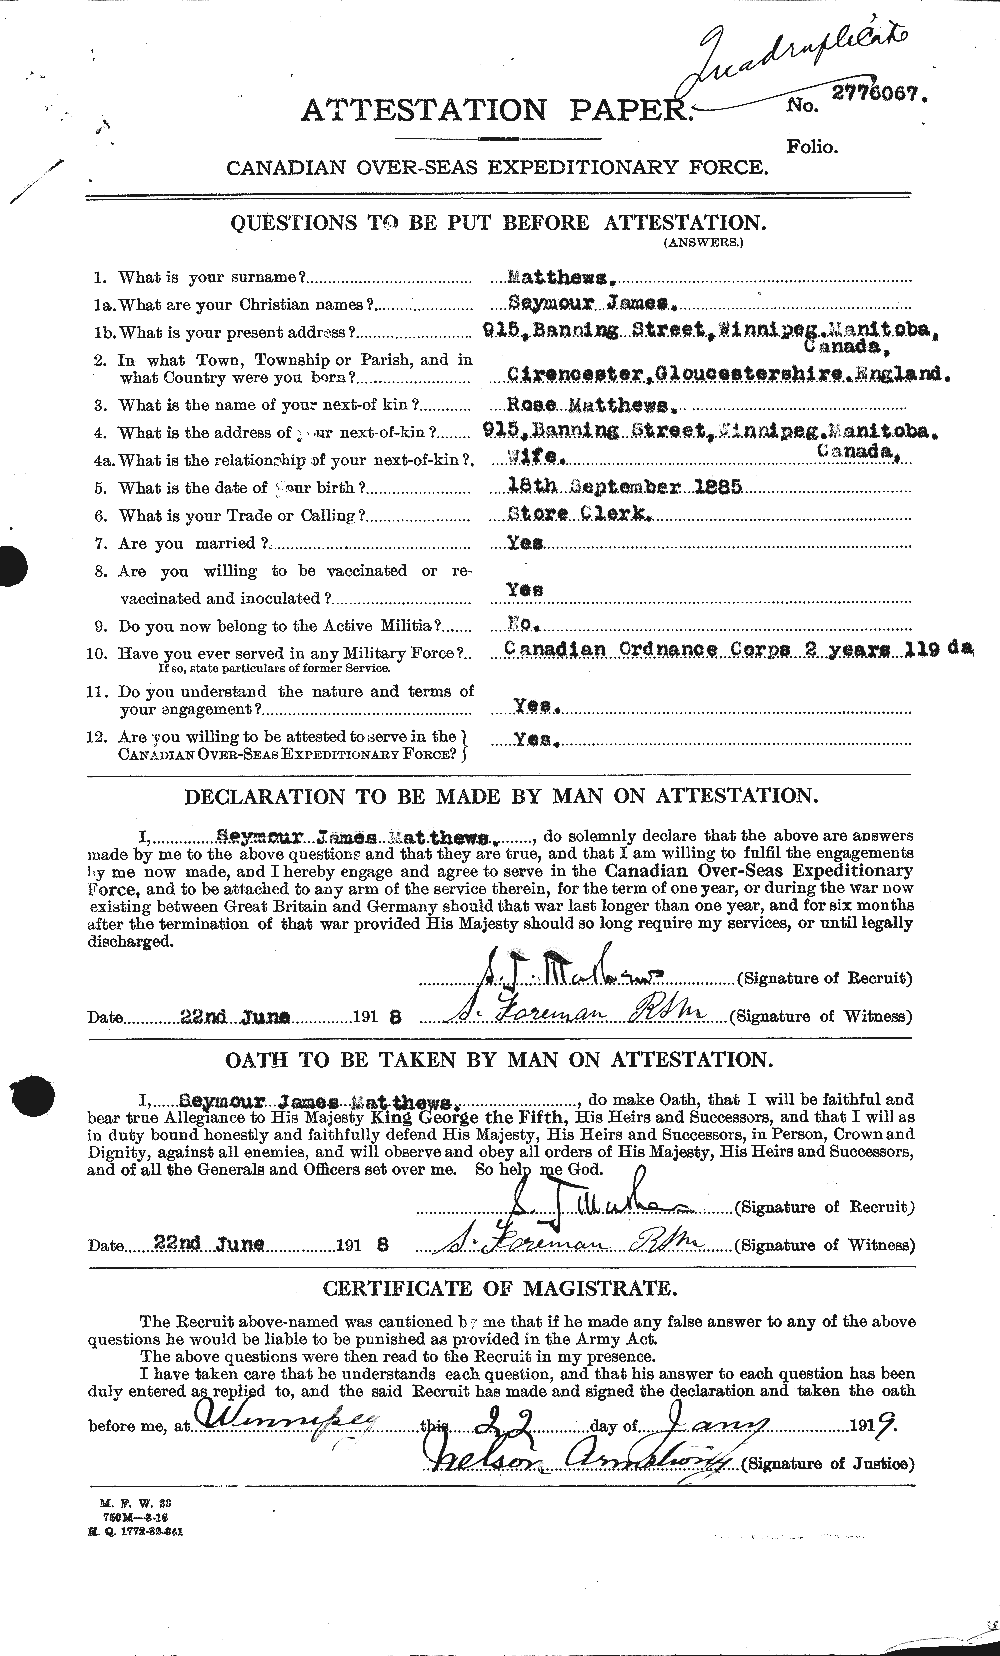 Personnel Records of the First World War - CEF 483961a